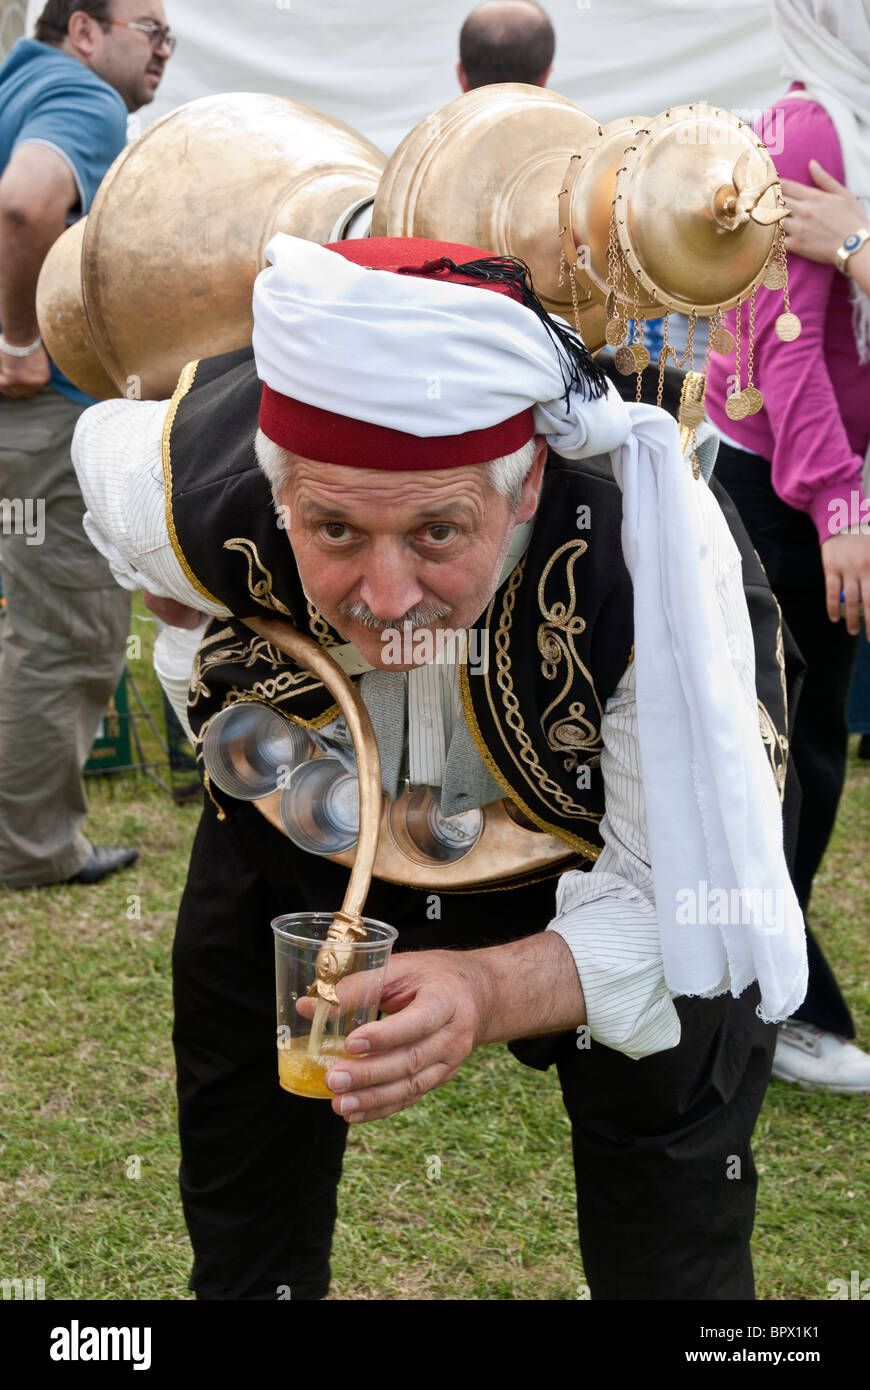 TURKISH MAN IN TRADITIONAL FOLCLORIC DRESS POURING SHERBET IN TO THE GLASS Stock Photo